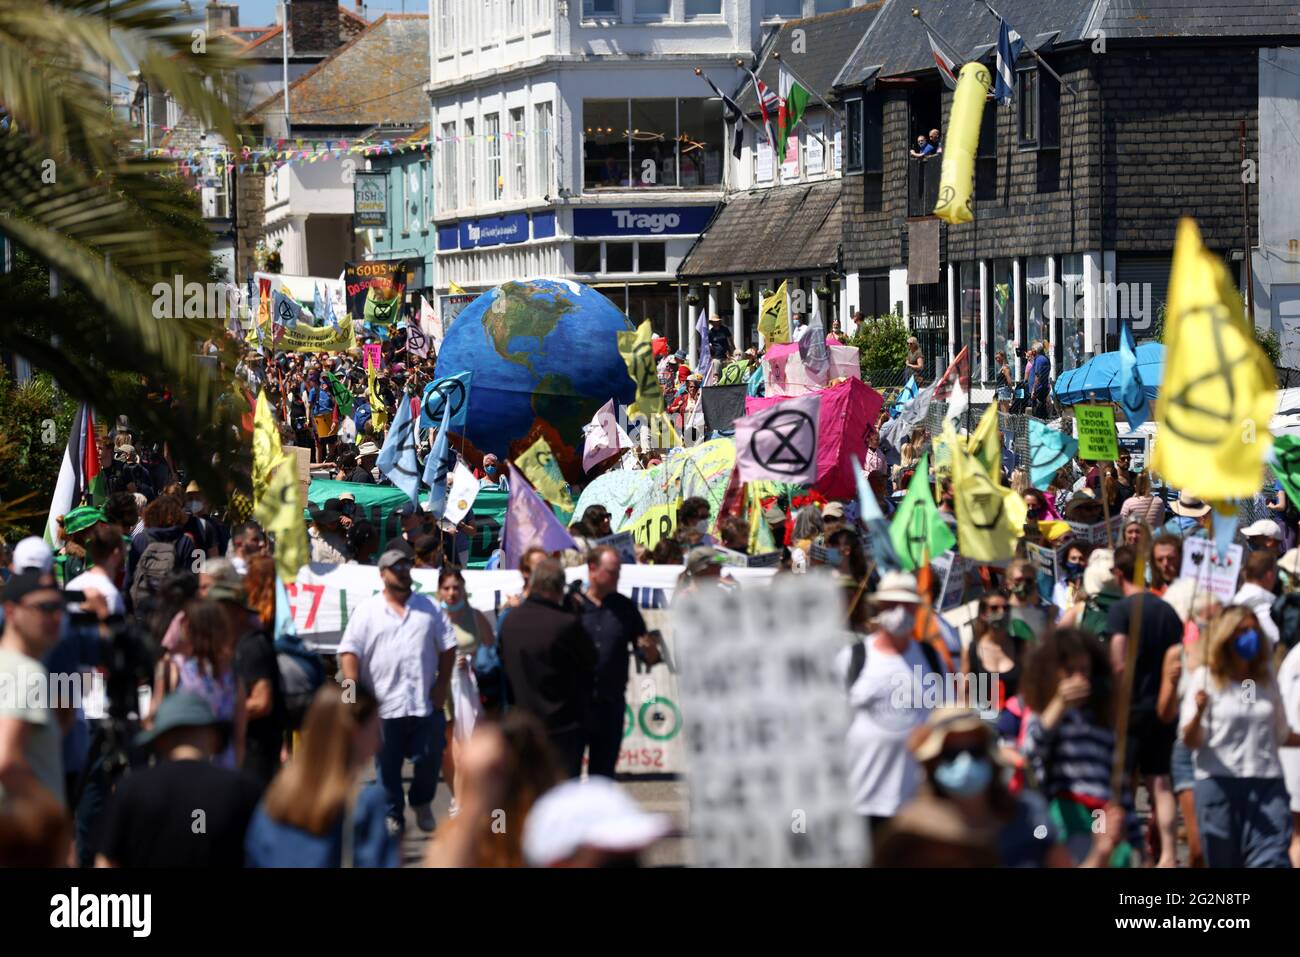 Protestors attend an Extinction Rebellion demonstration in Falmouth, during the G7 summit in Cornwall, Britain, June 12, 2021. REUTERS/Tom Nicholson Stock Photo